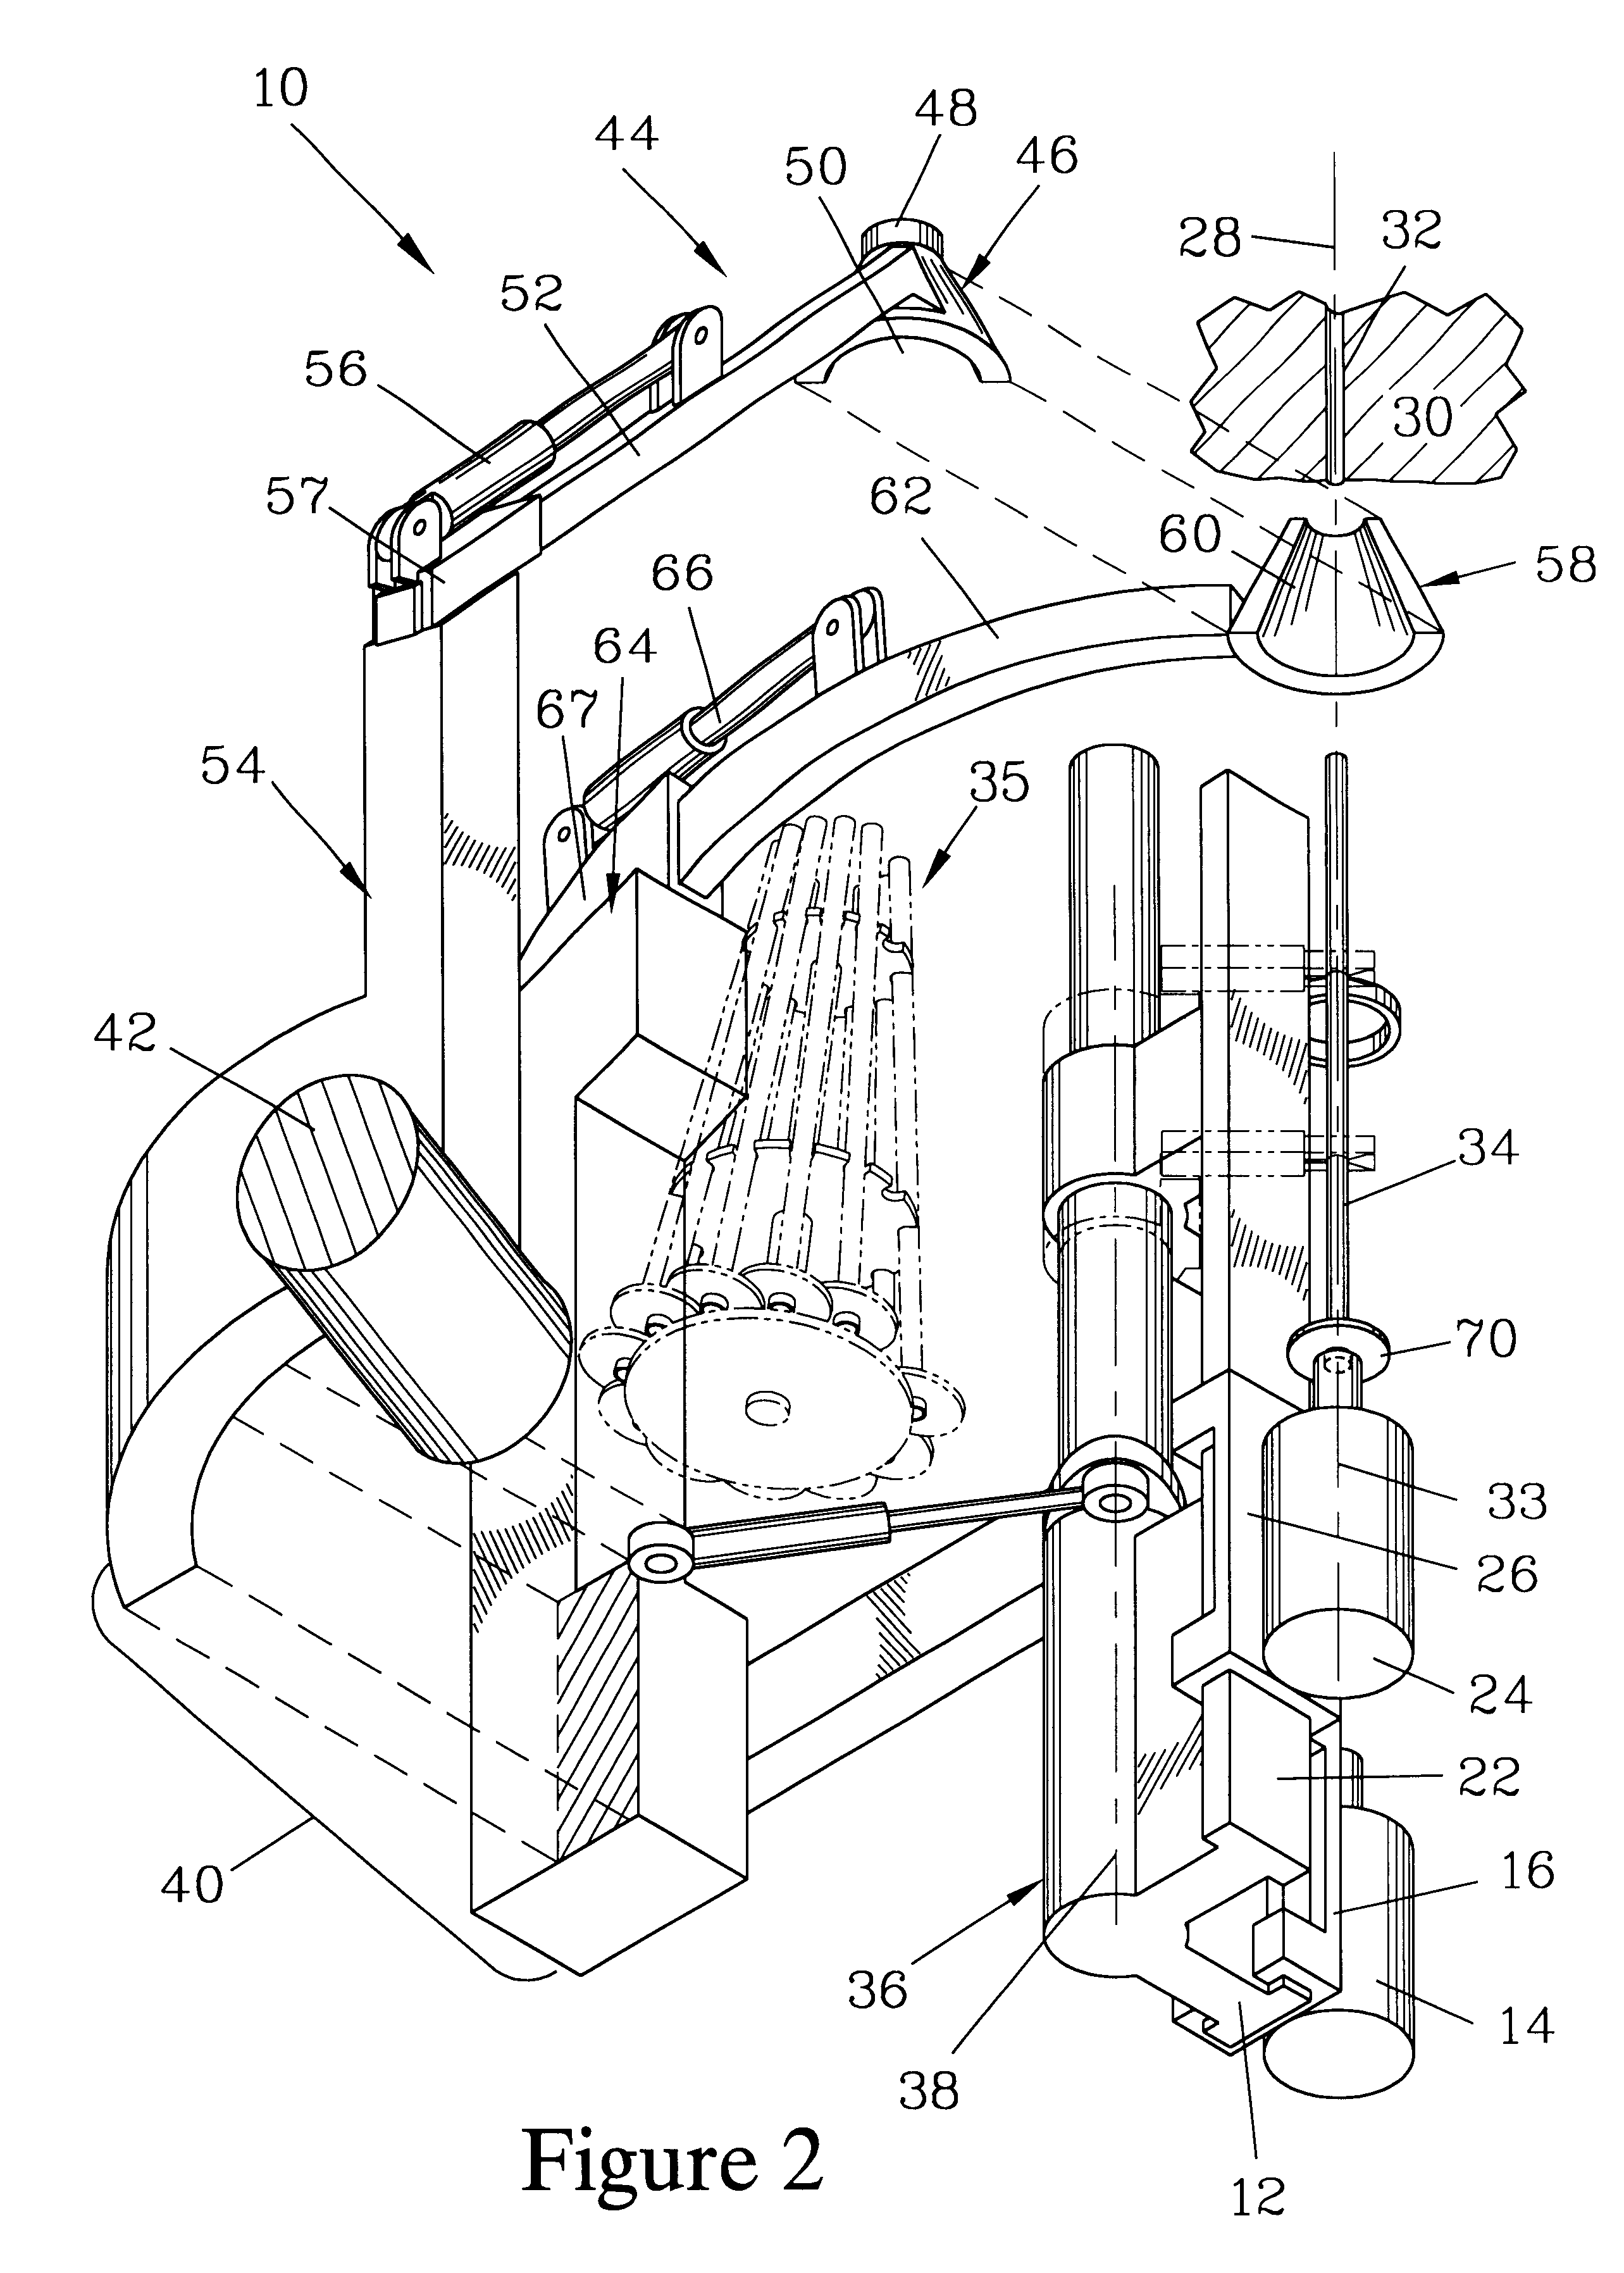 Turret rock bolter with stinger/centralizer